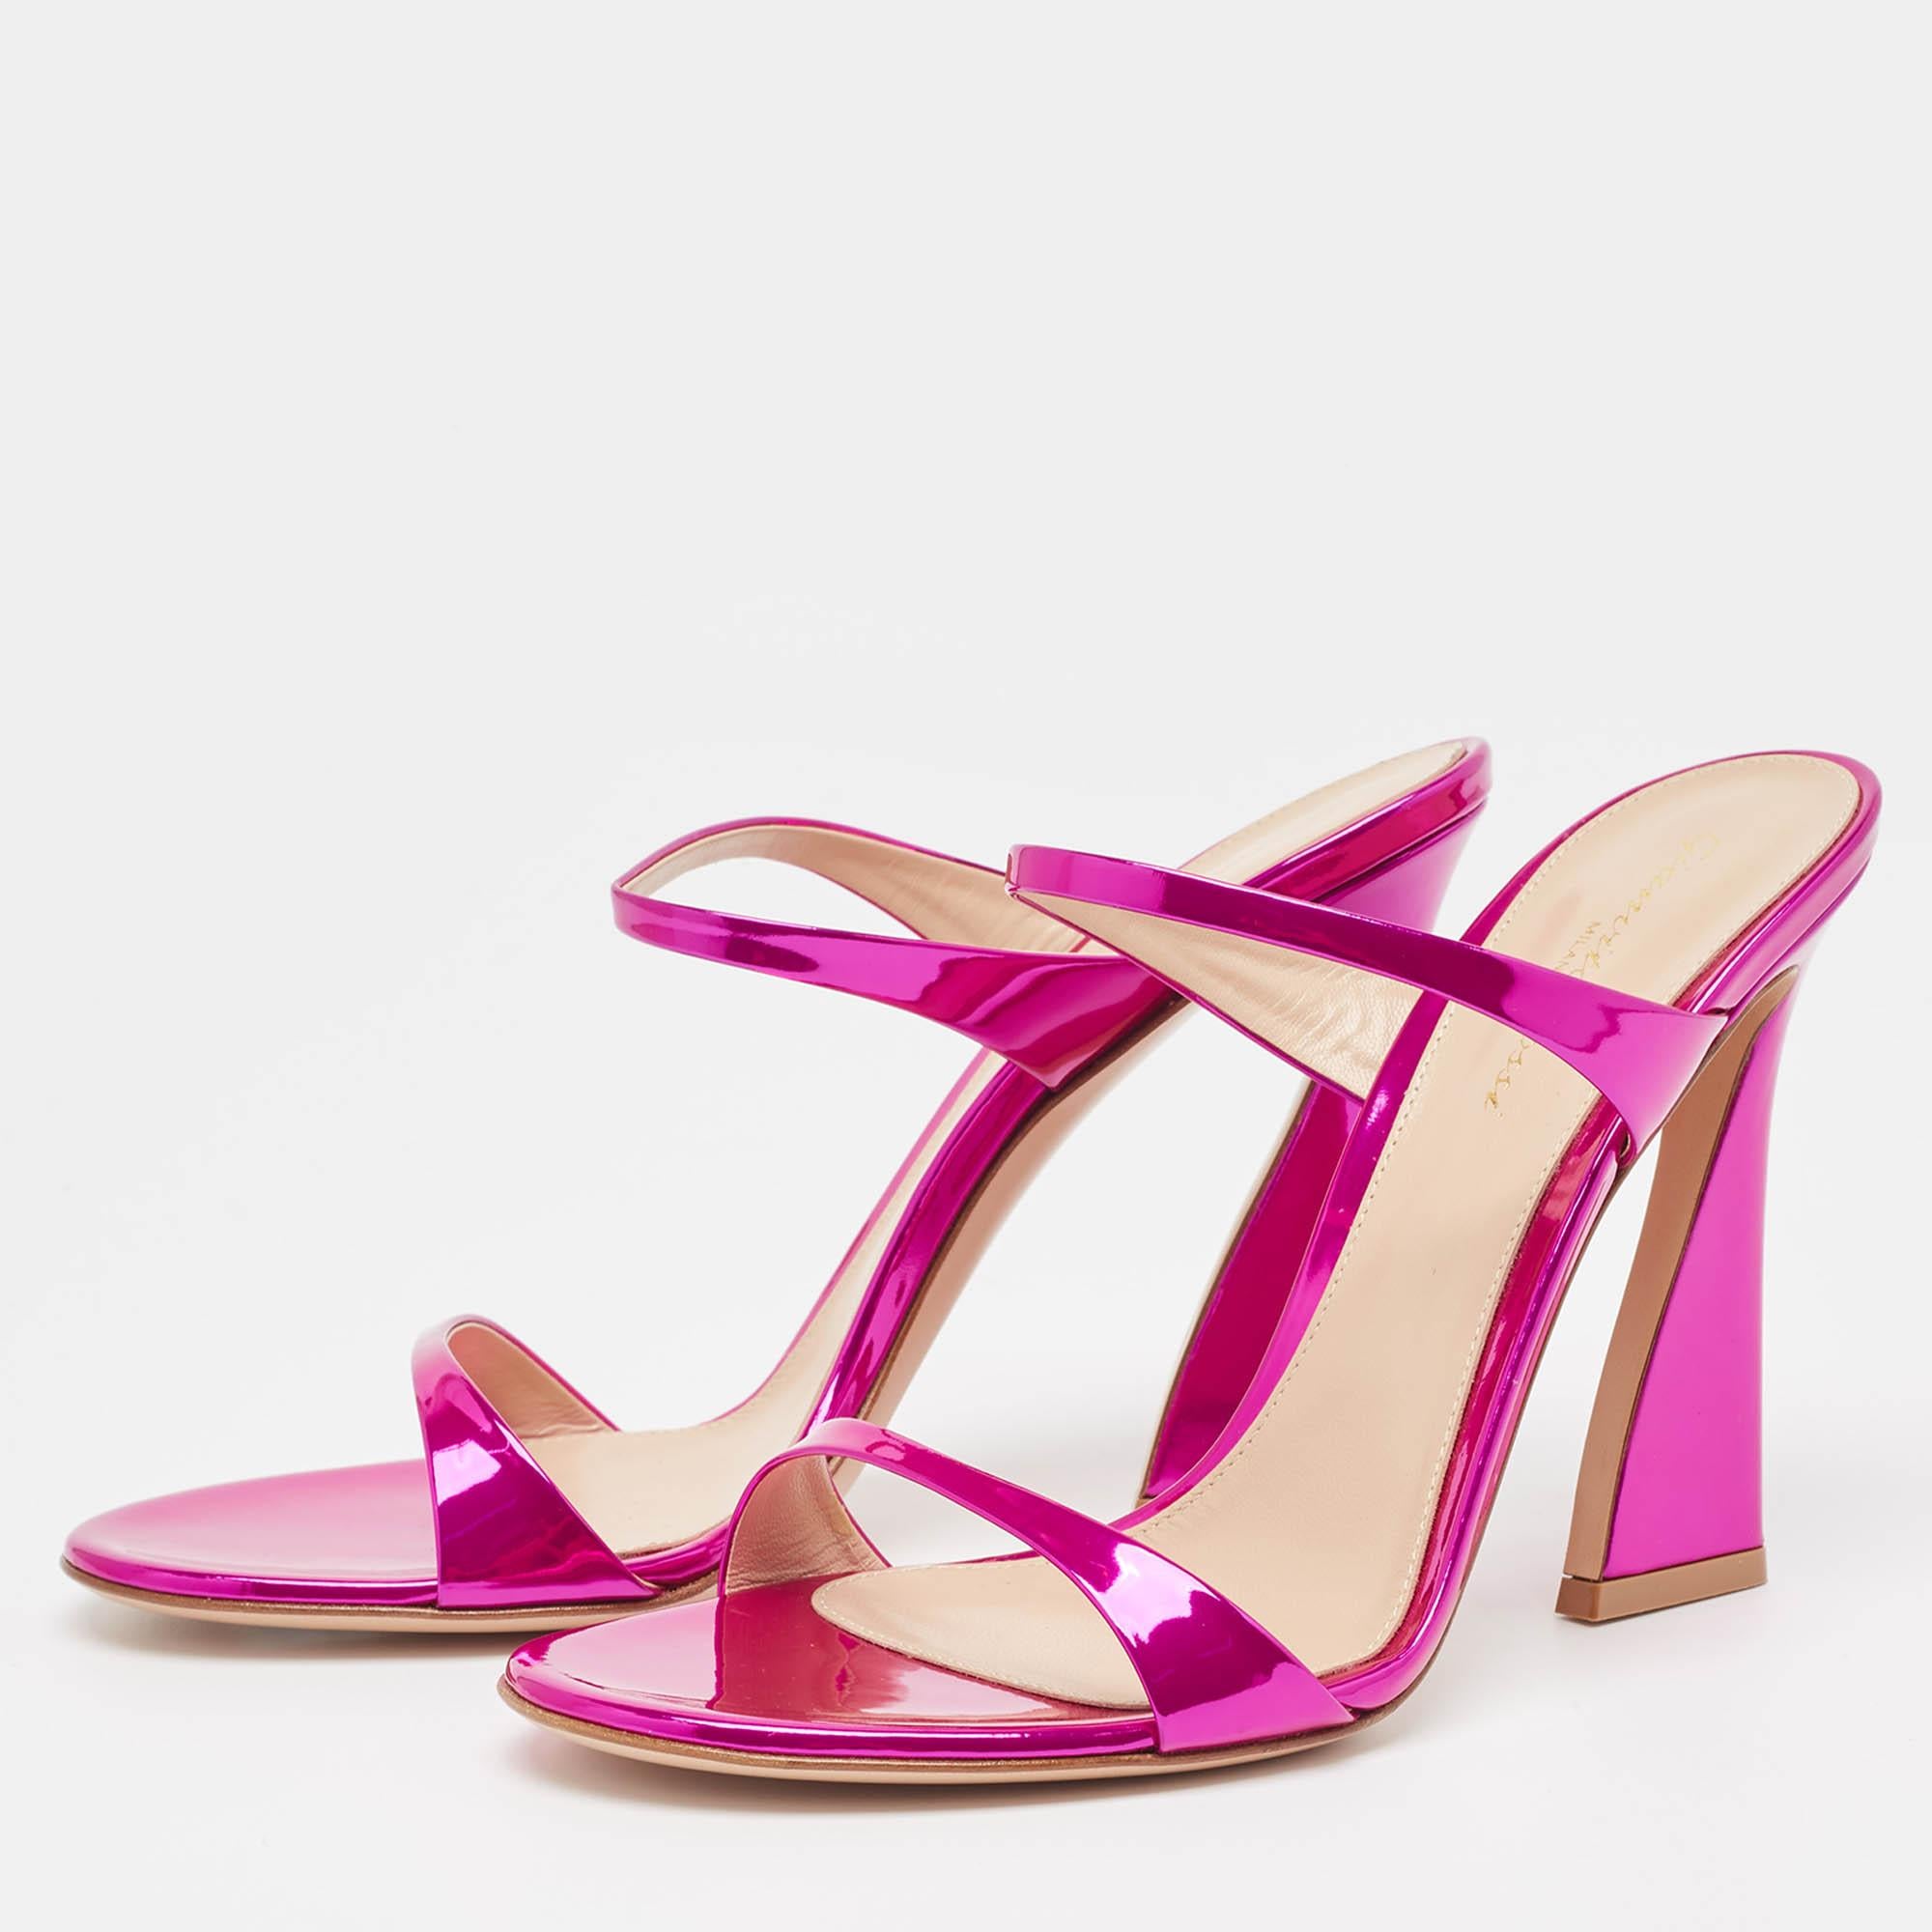 Gianvito Rossi Metallic Pink Leather Aura Sandals Size 39.5 For Sale 4